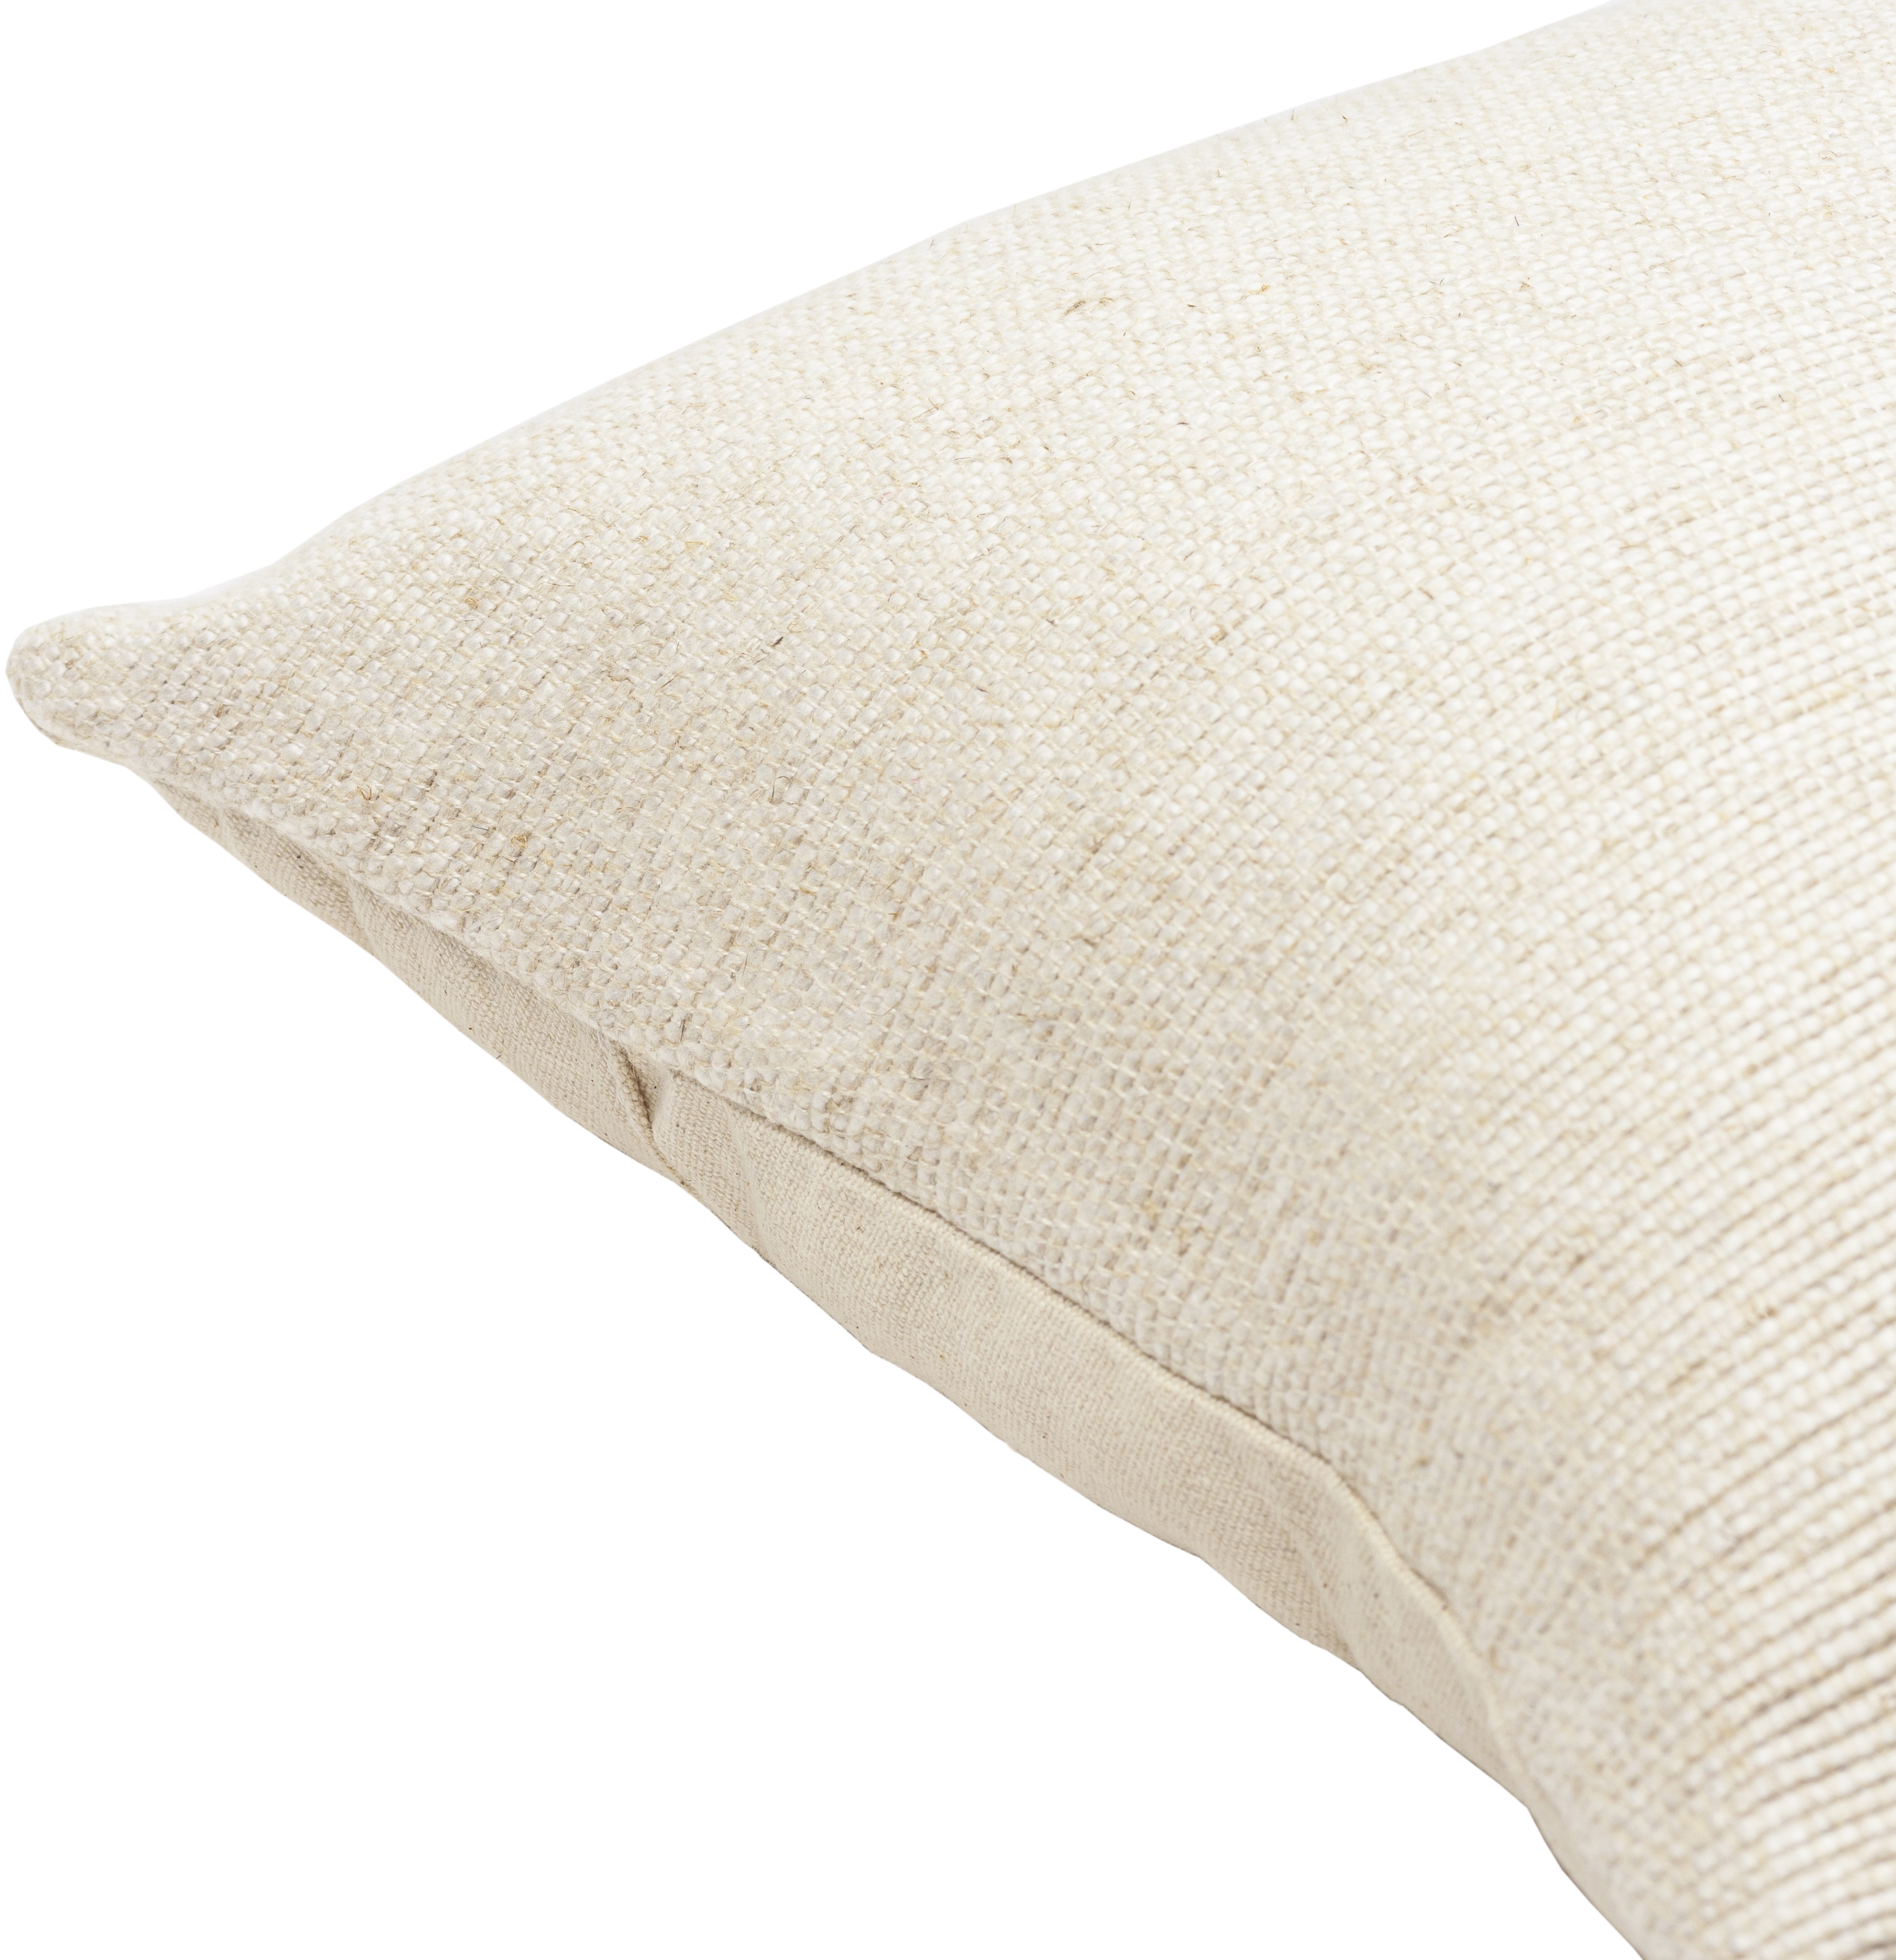 Sallie Throw Pillow, 18" x 18", with down insert - Image 2